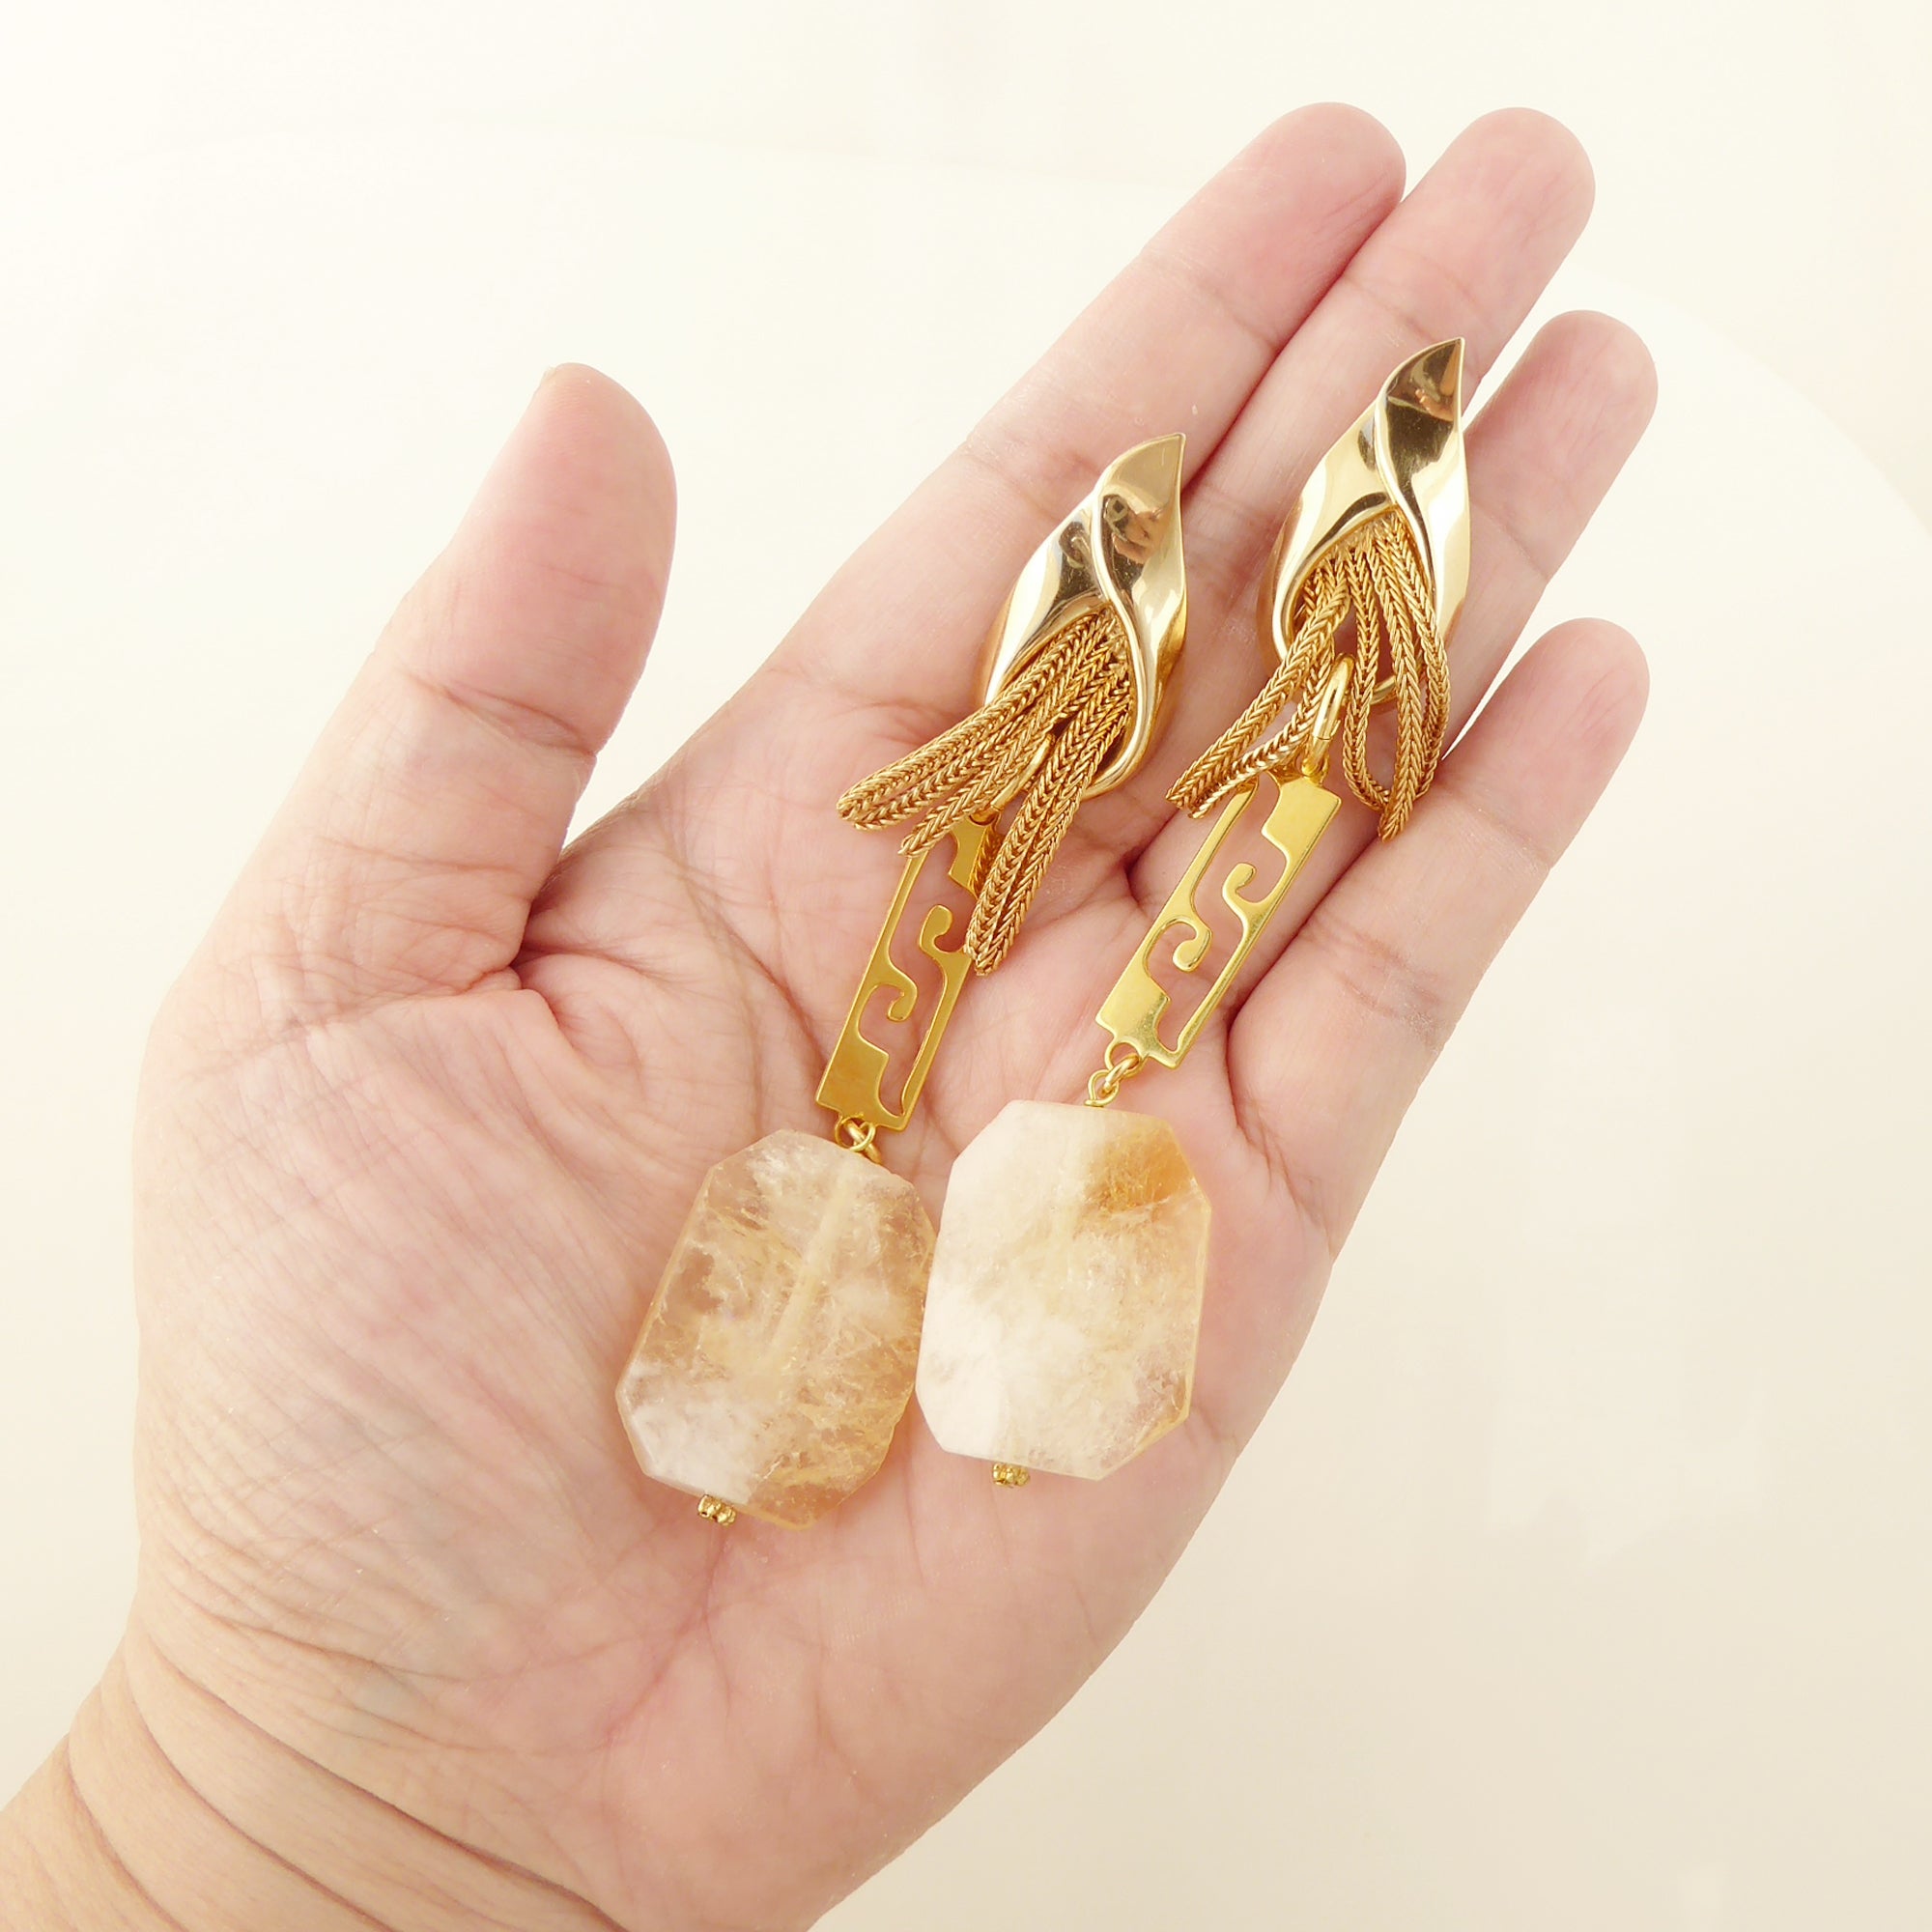 Citrine nugget clip on earrings by Jenny Dayco 7